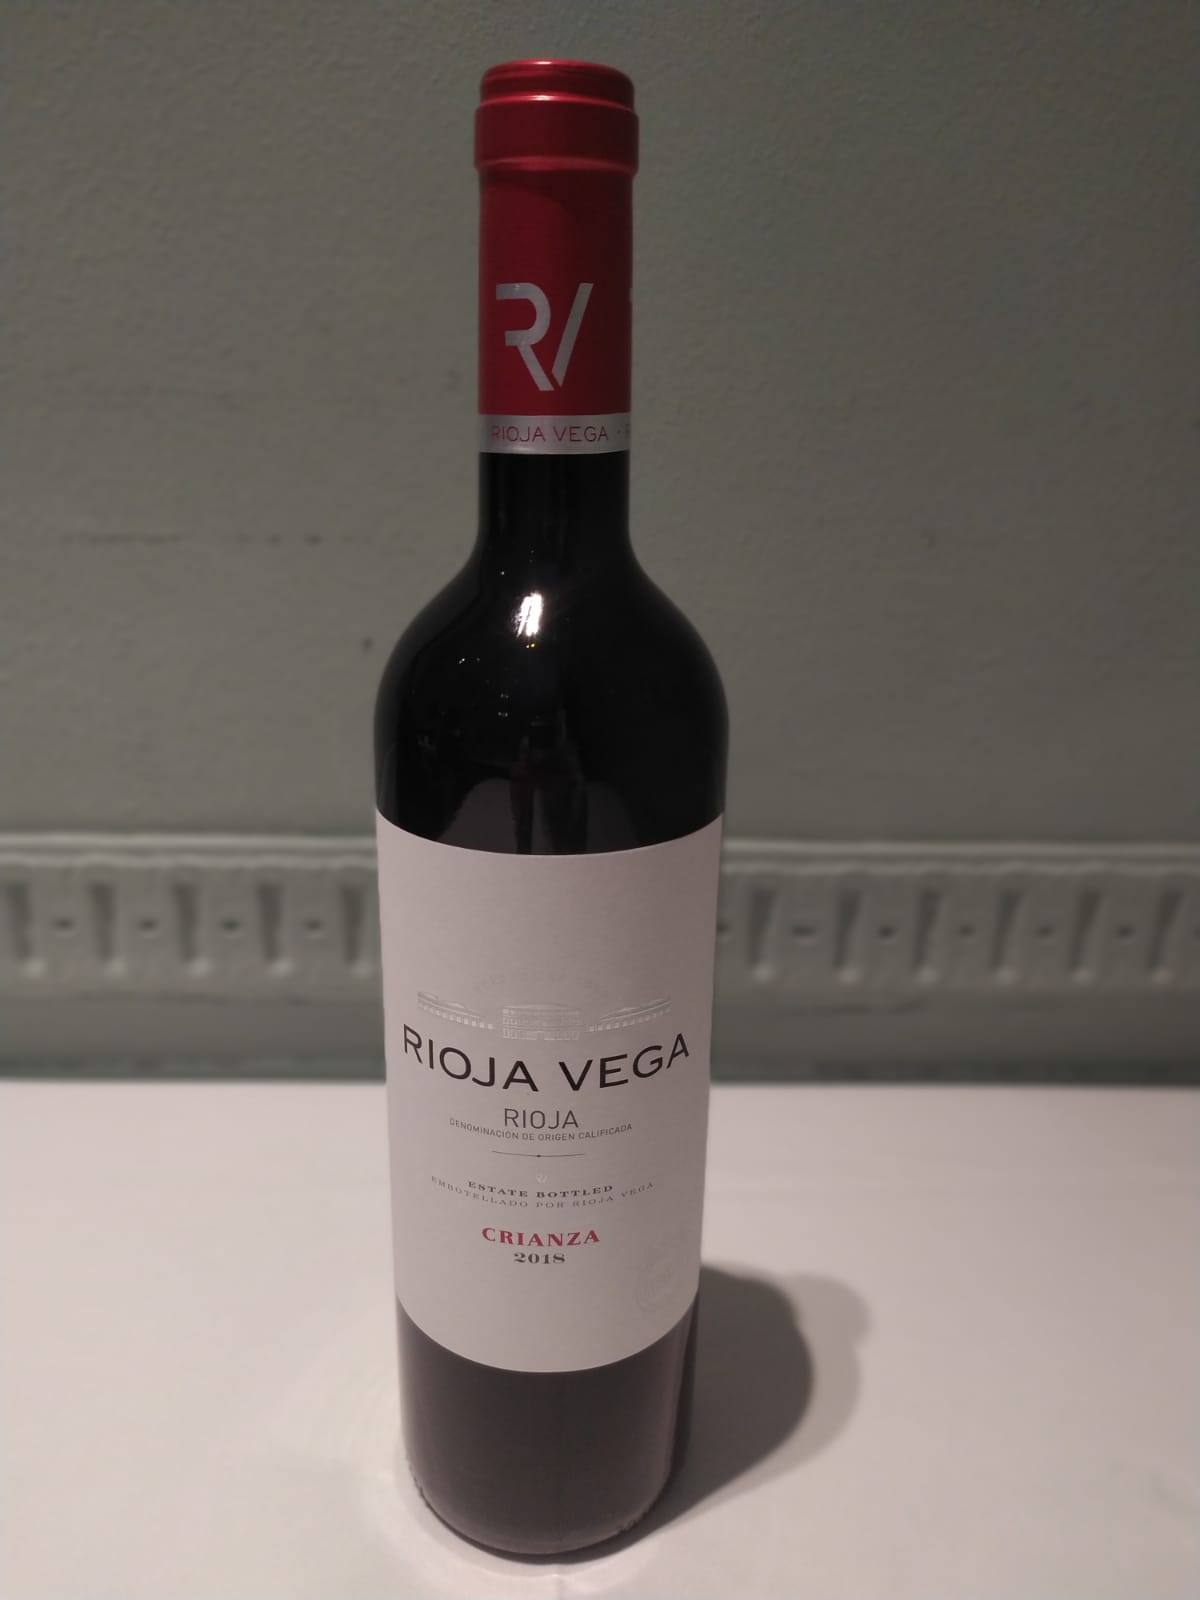 Rioja Vega (Recommendation of the house)